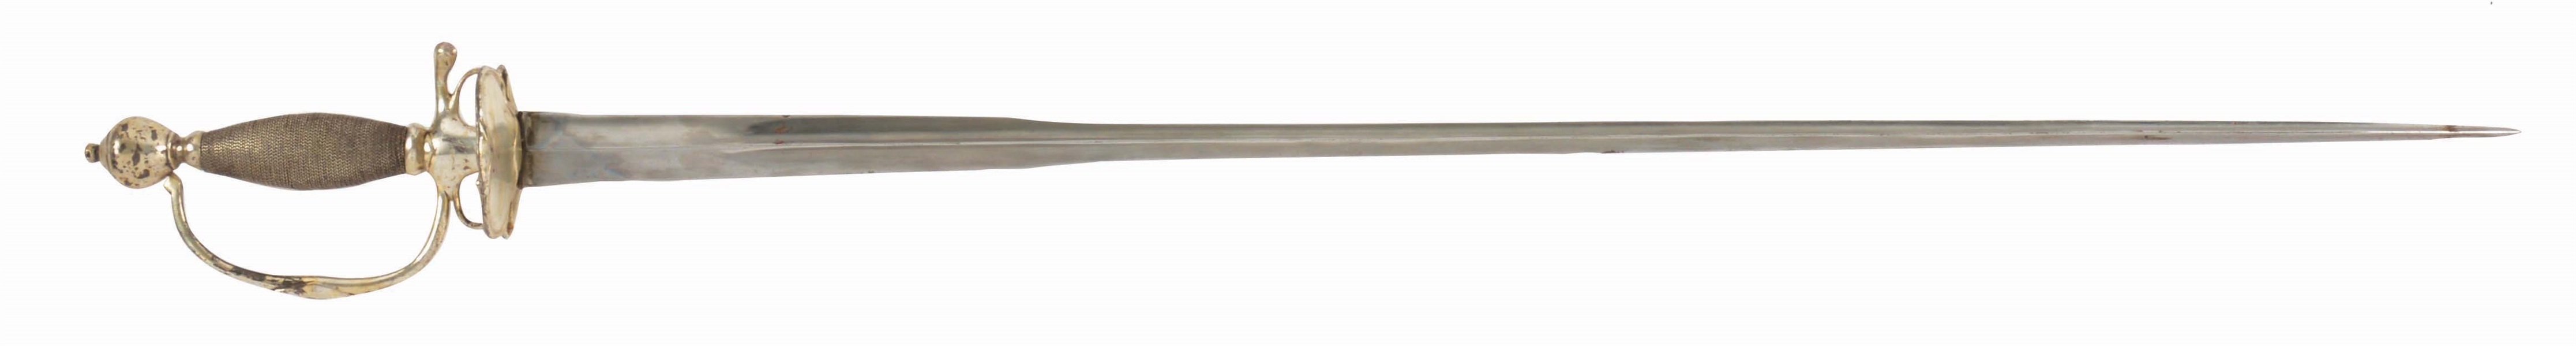 ENGLISH SILVER-HILTED SMALL SWORD.